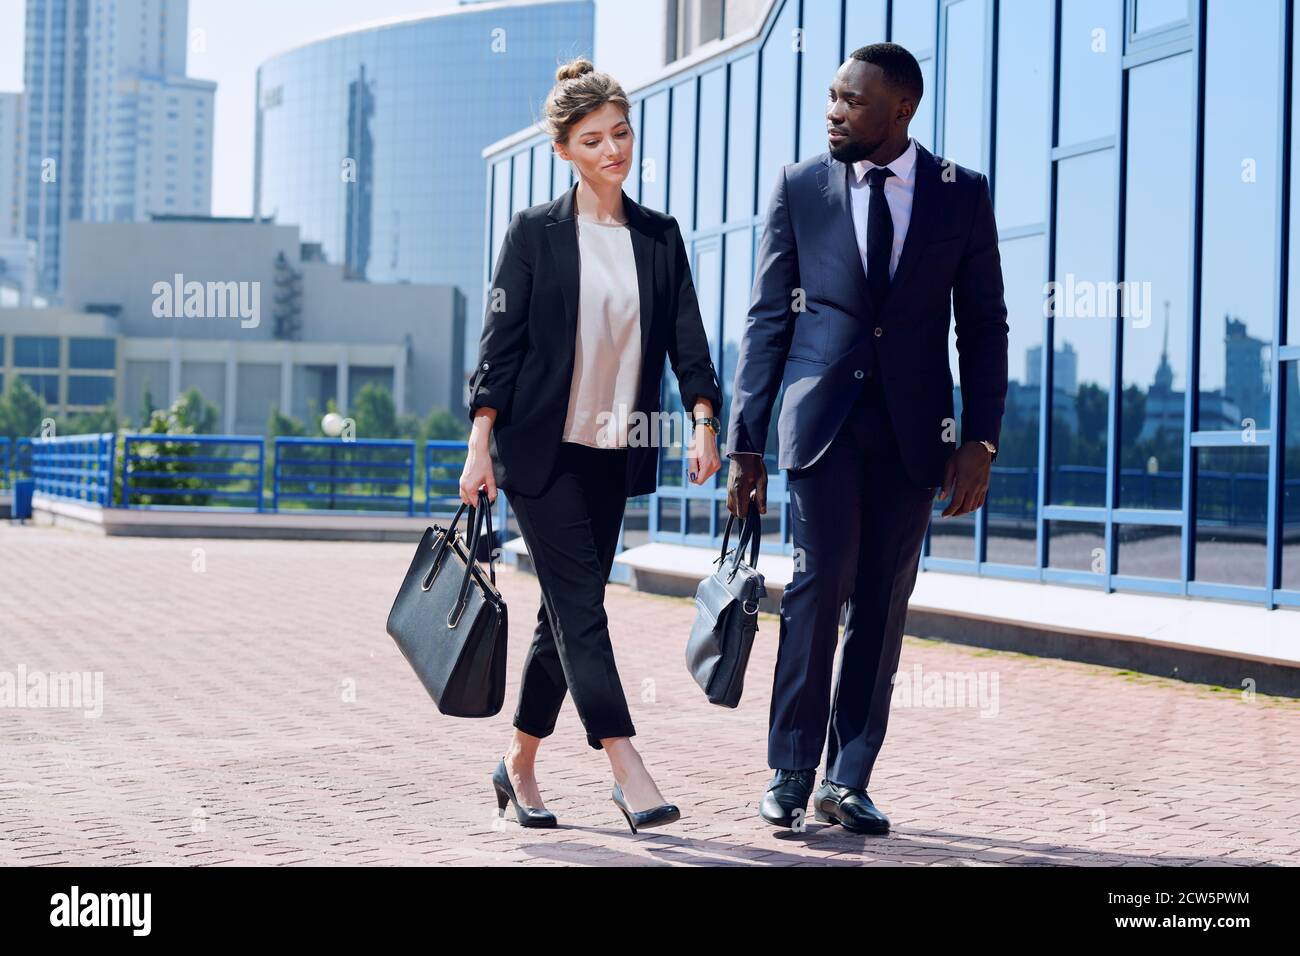 Young intercultural business partners in formalwear moving down sidewalk Stock Photo